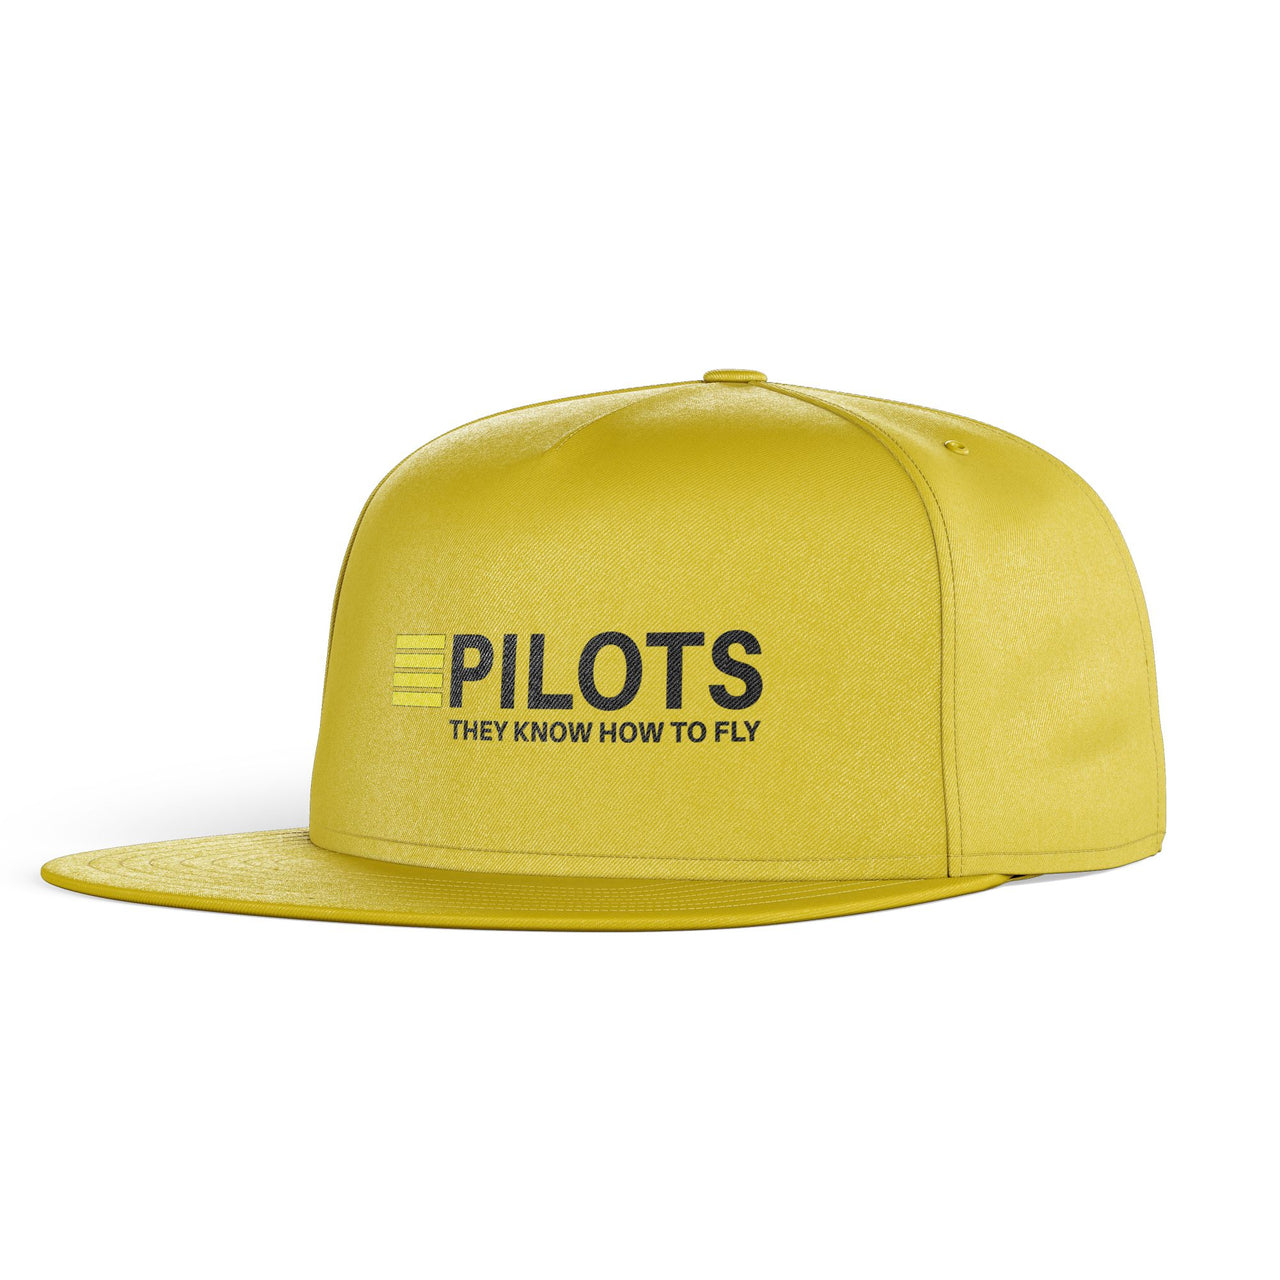 Pilots They Know How To Fly Designed Snapback Caps & Hats